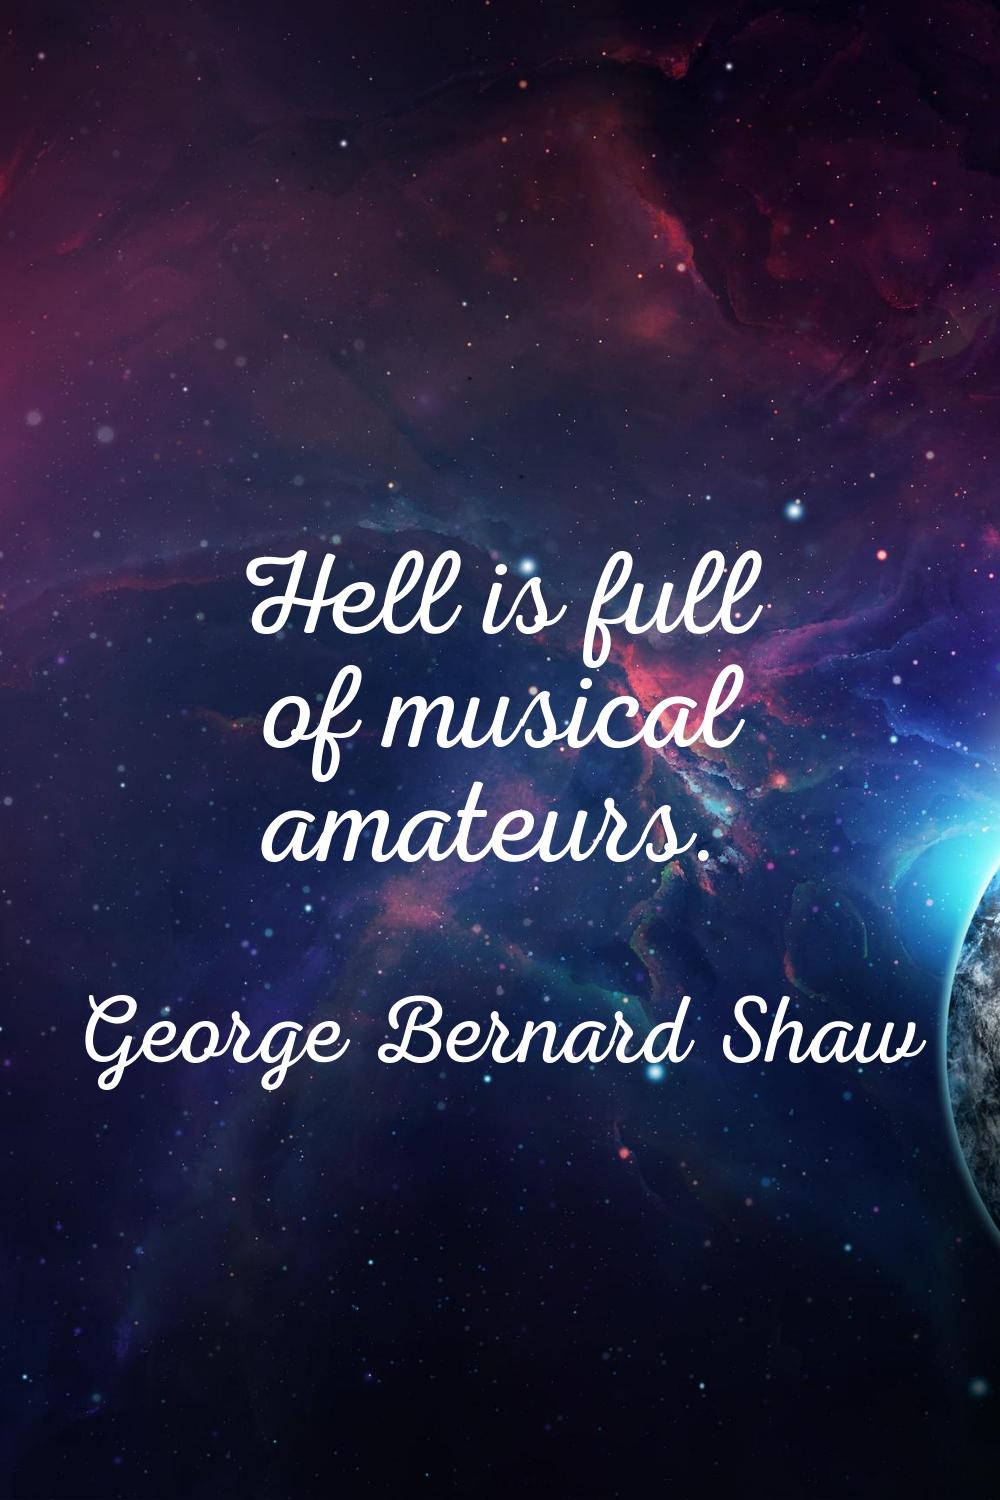 Hell is full of musical amateurs.